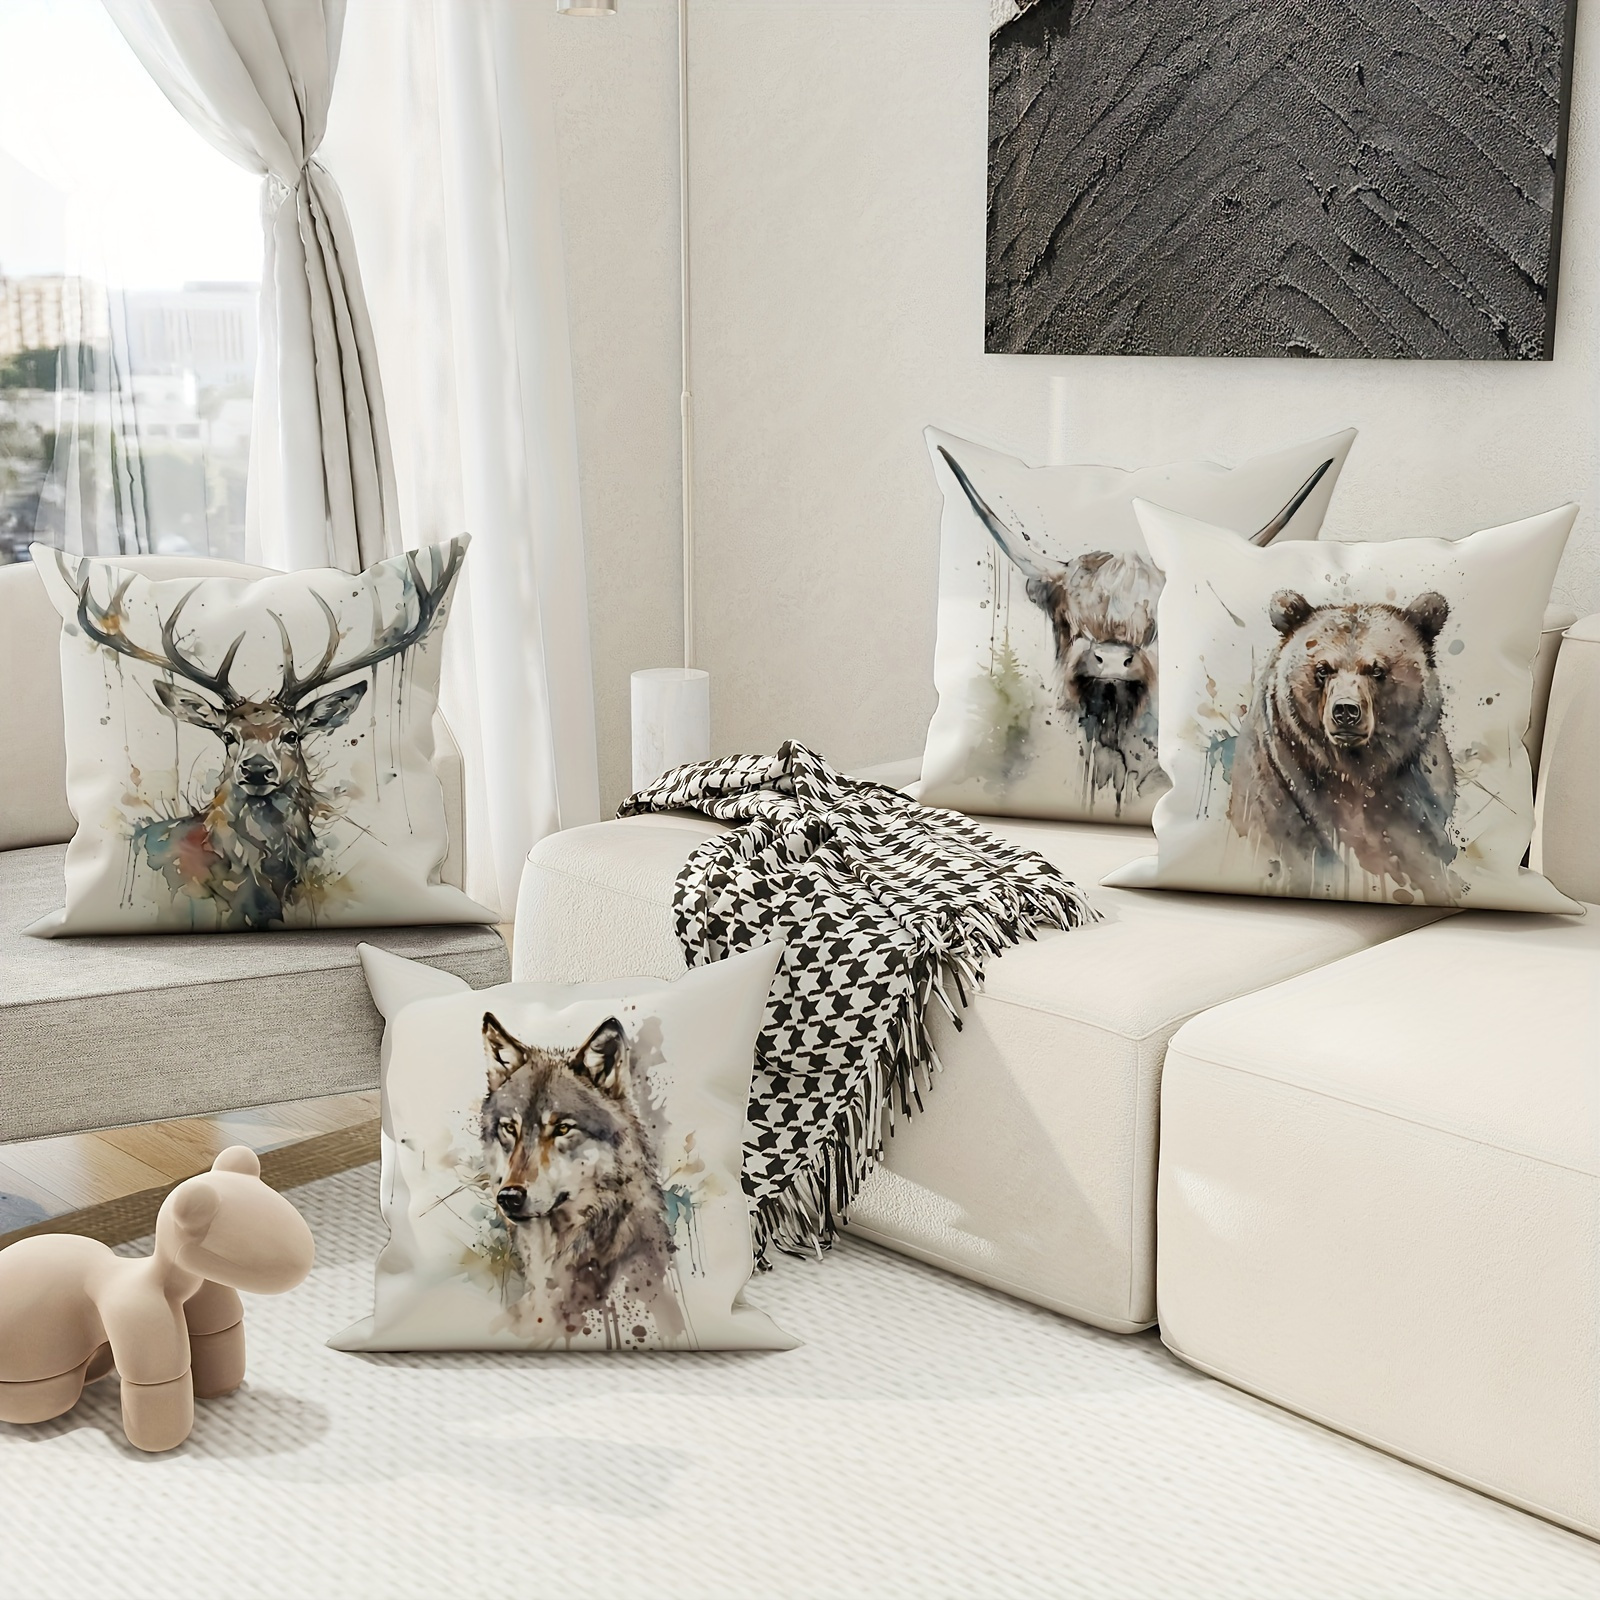 

4-piece Set Rustic Farmhouse Throw Pillow Covers - Reindeer, Wolf, Bear & Highland Cow Designs In White And Gray Polyester - 18x18 Inches With Zipper Closure For Living Room, Bedroom, Sofa Decor